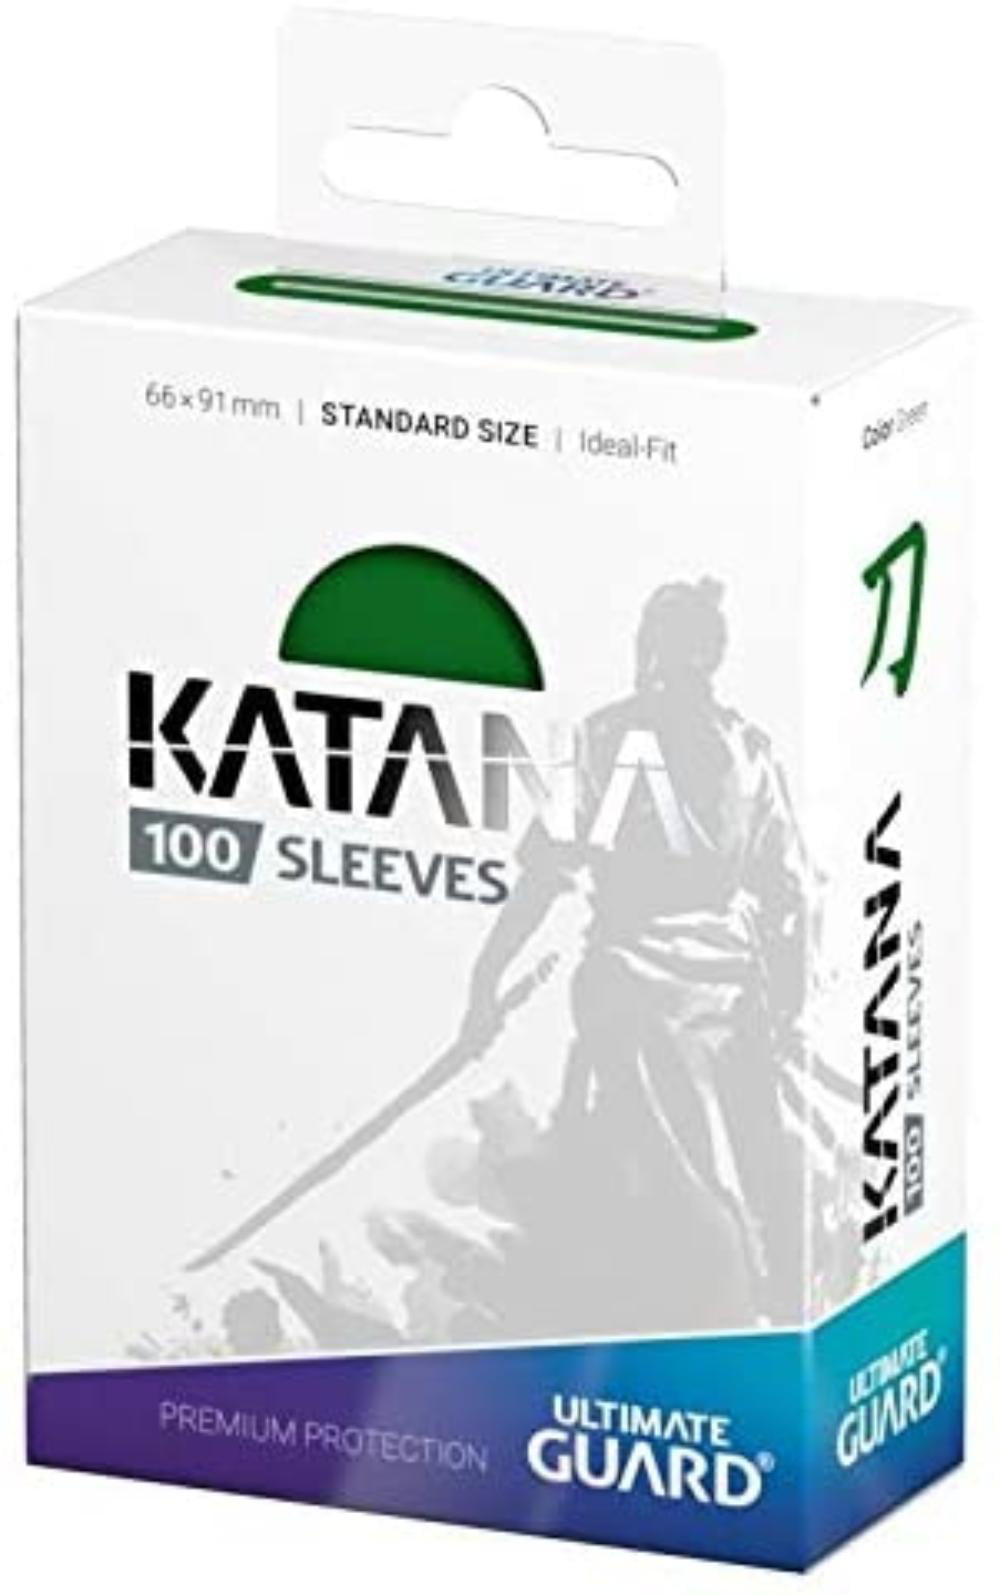 Ultimate Guard Katana Sleeves Standard Size 100 Ct Opaque and Matte Green 